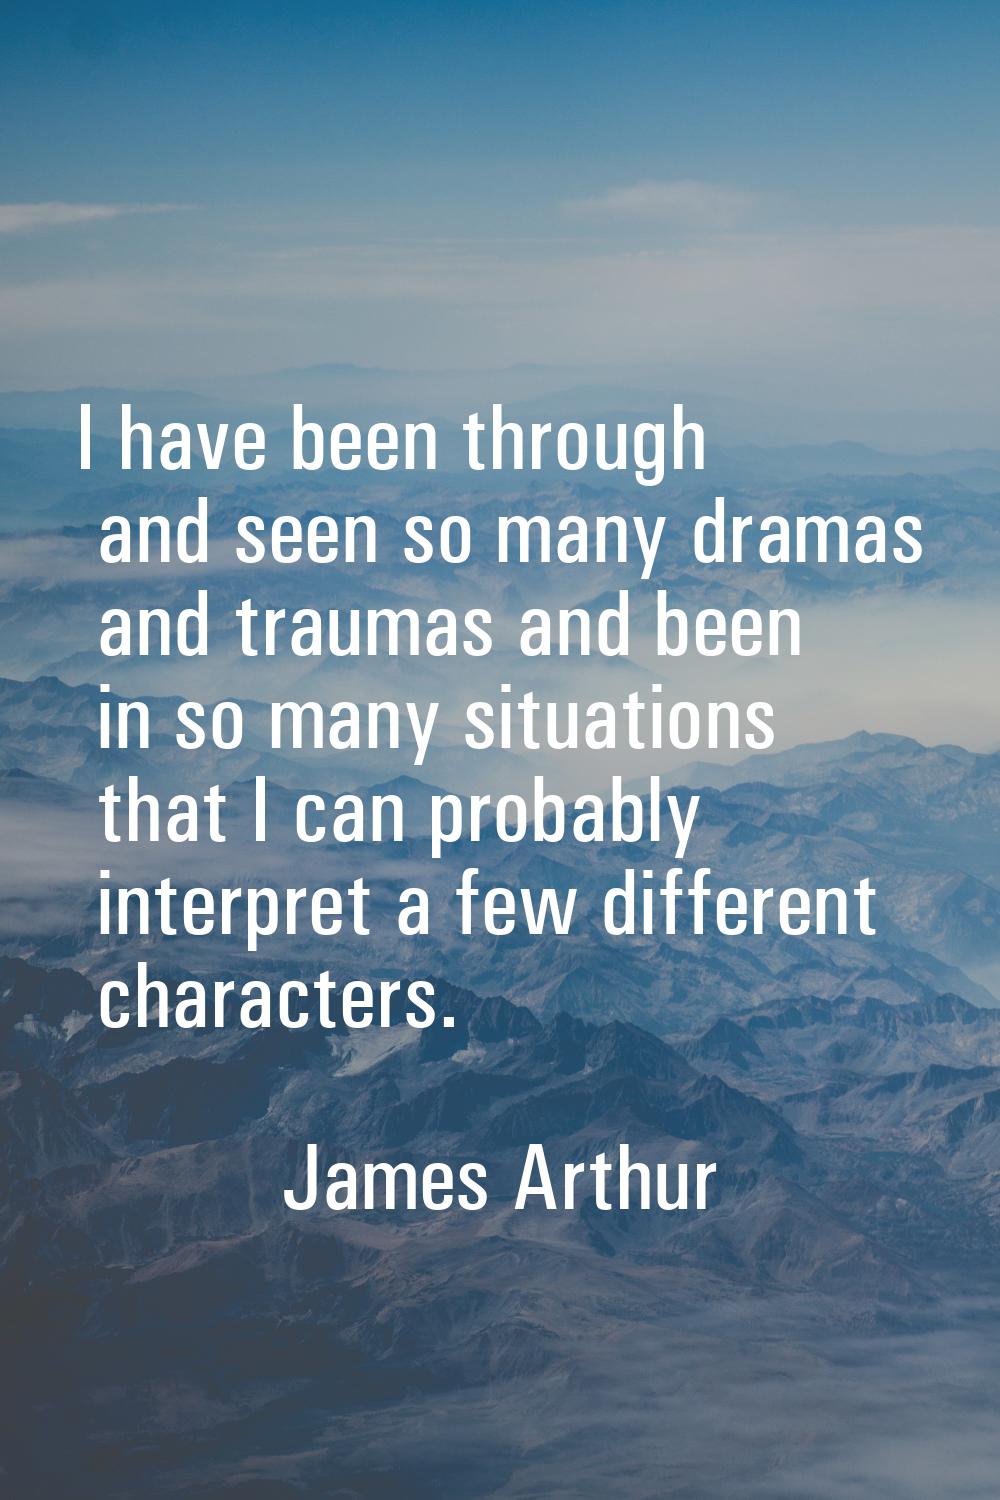 I have been through and seen so many dramas and traumas and been in so many situations that I can p